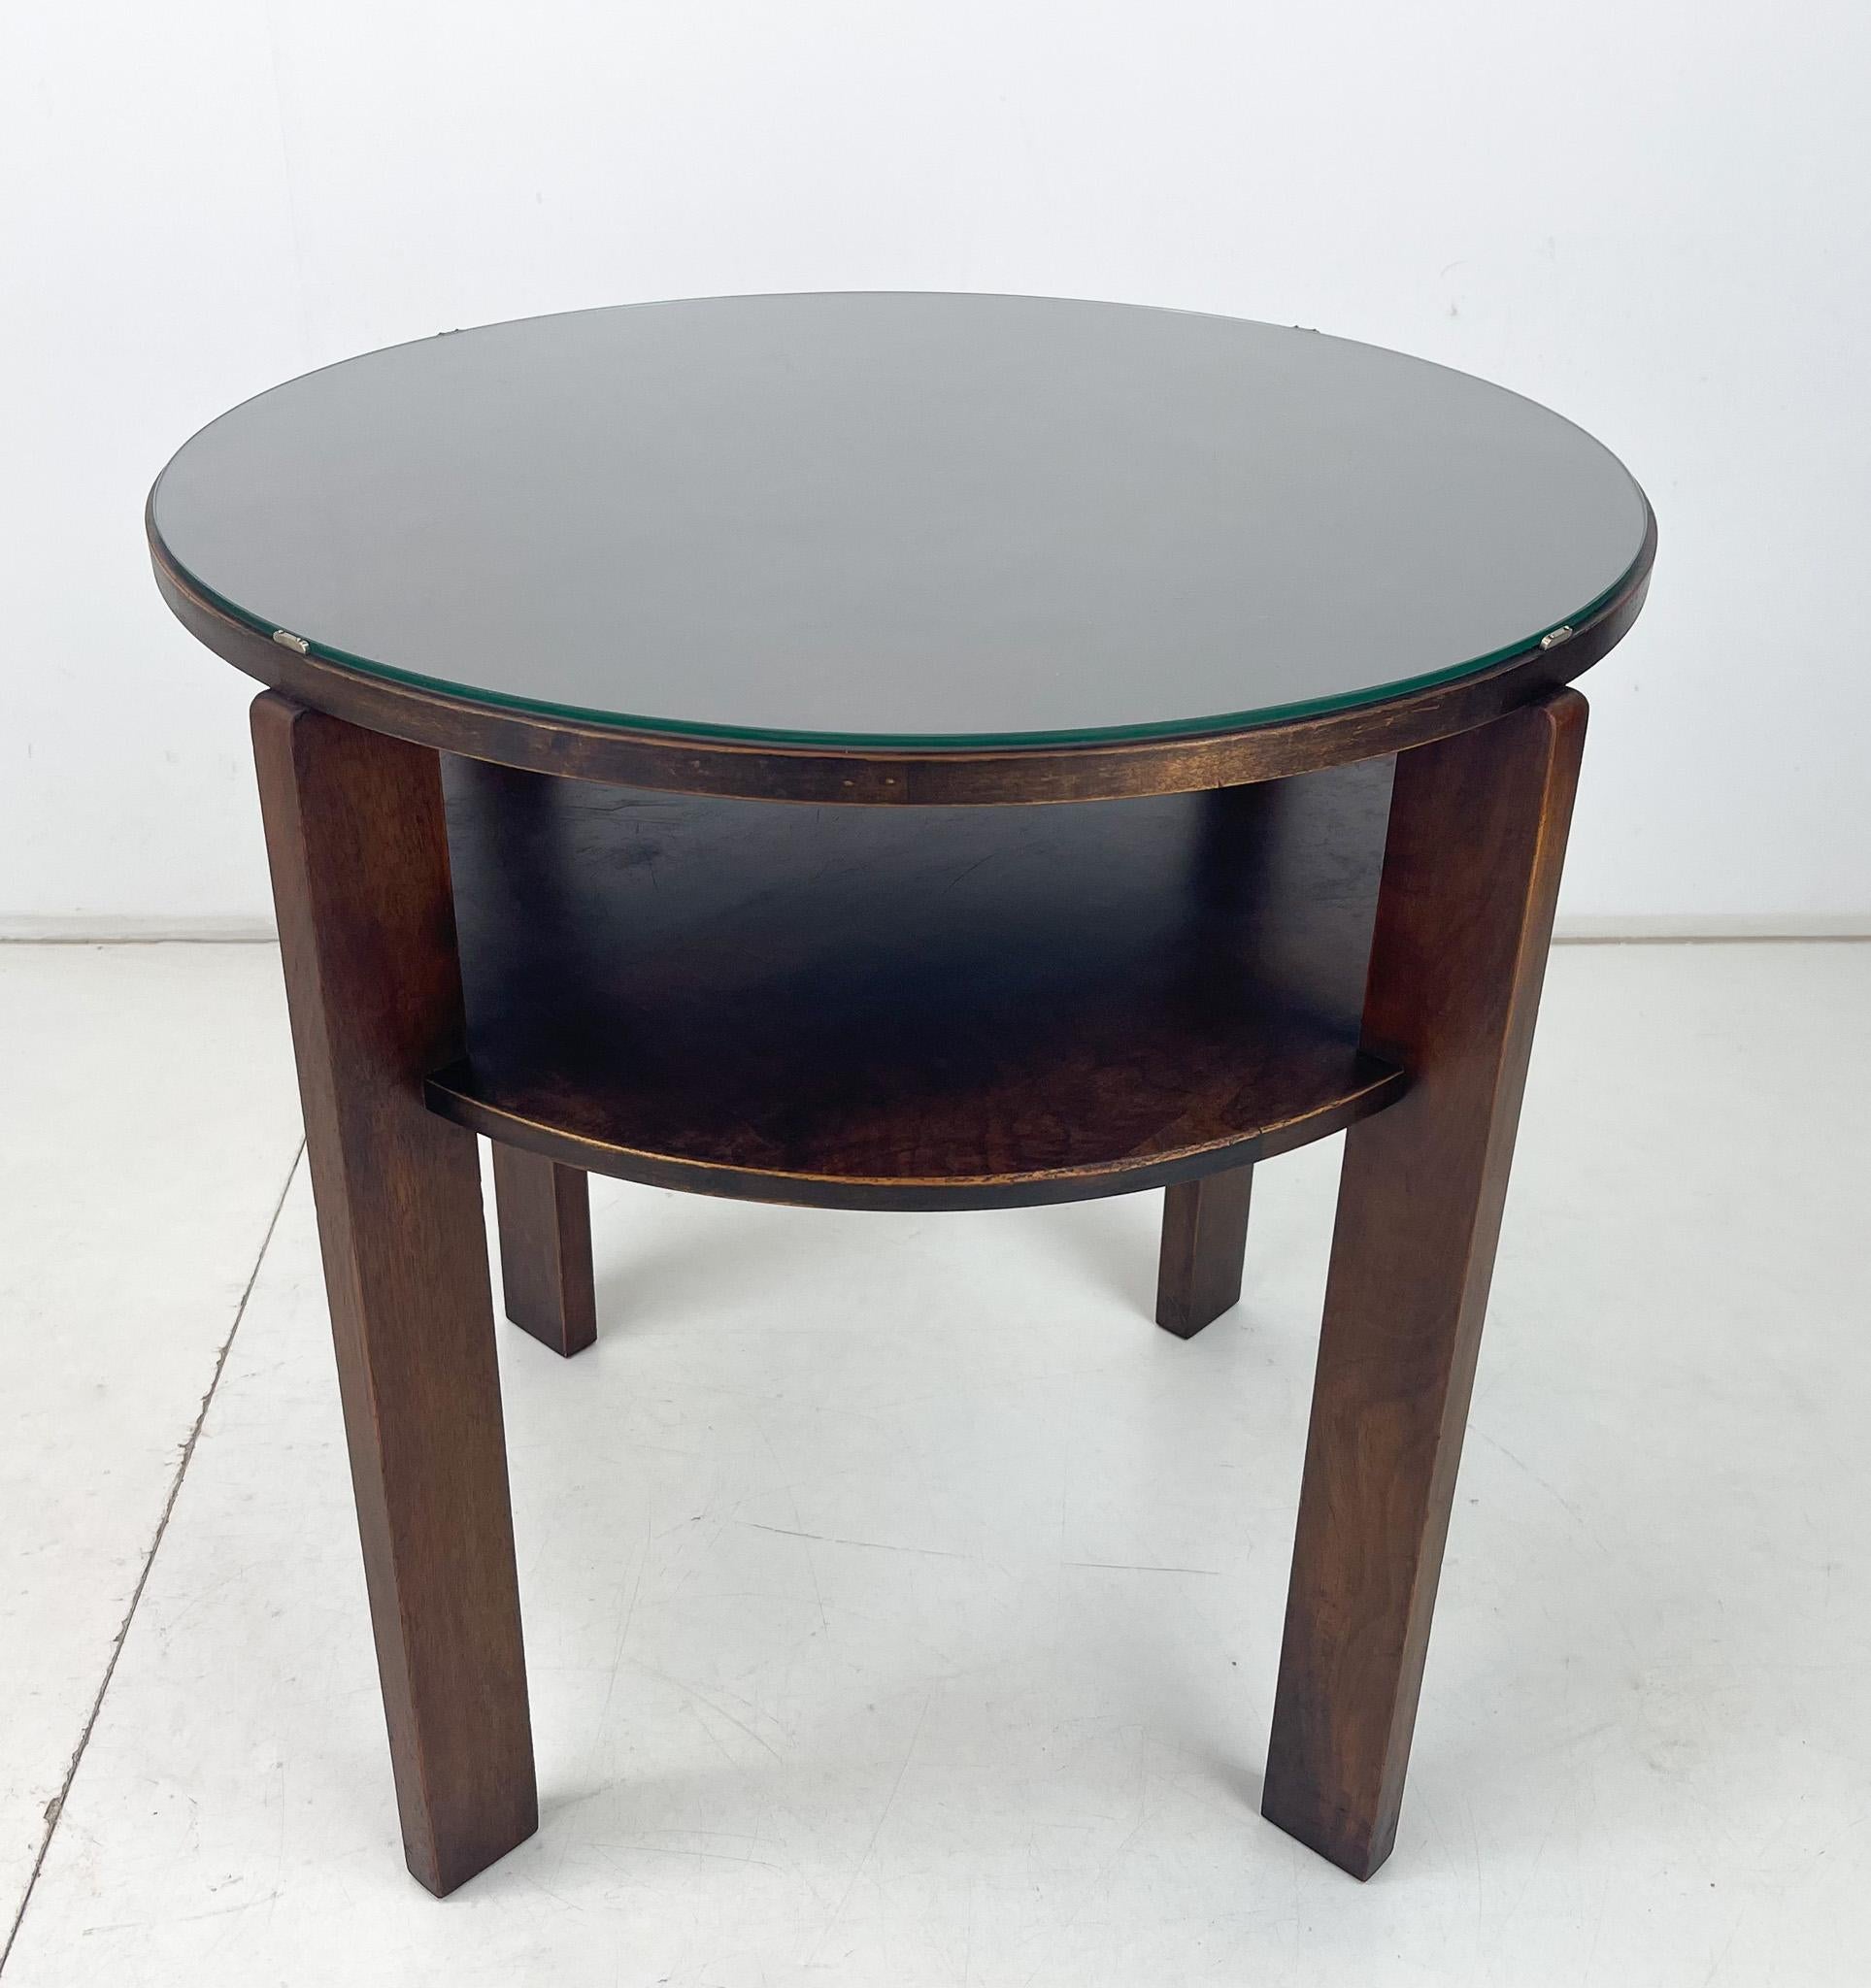 Vintage round wooden coffee table with glass top. Produced in Czechoslovakia in the 1940's. Signs of use are visible in the photos.